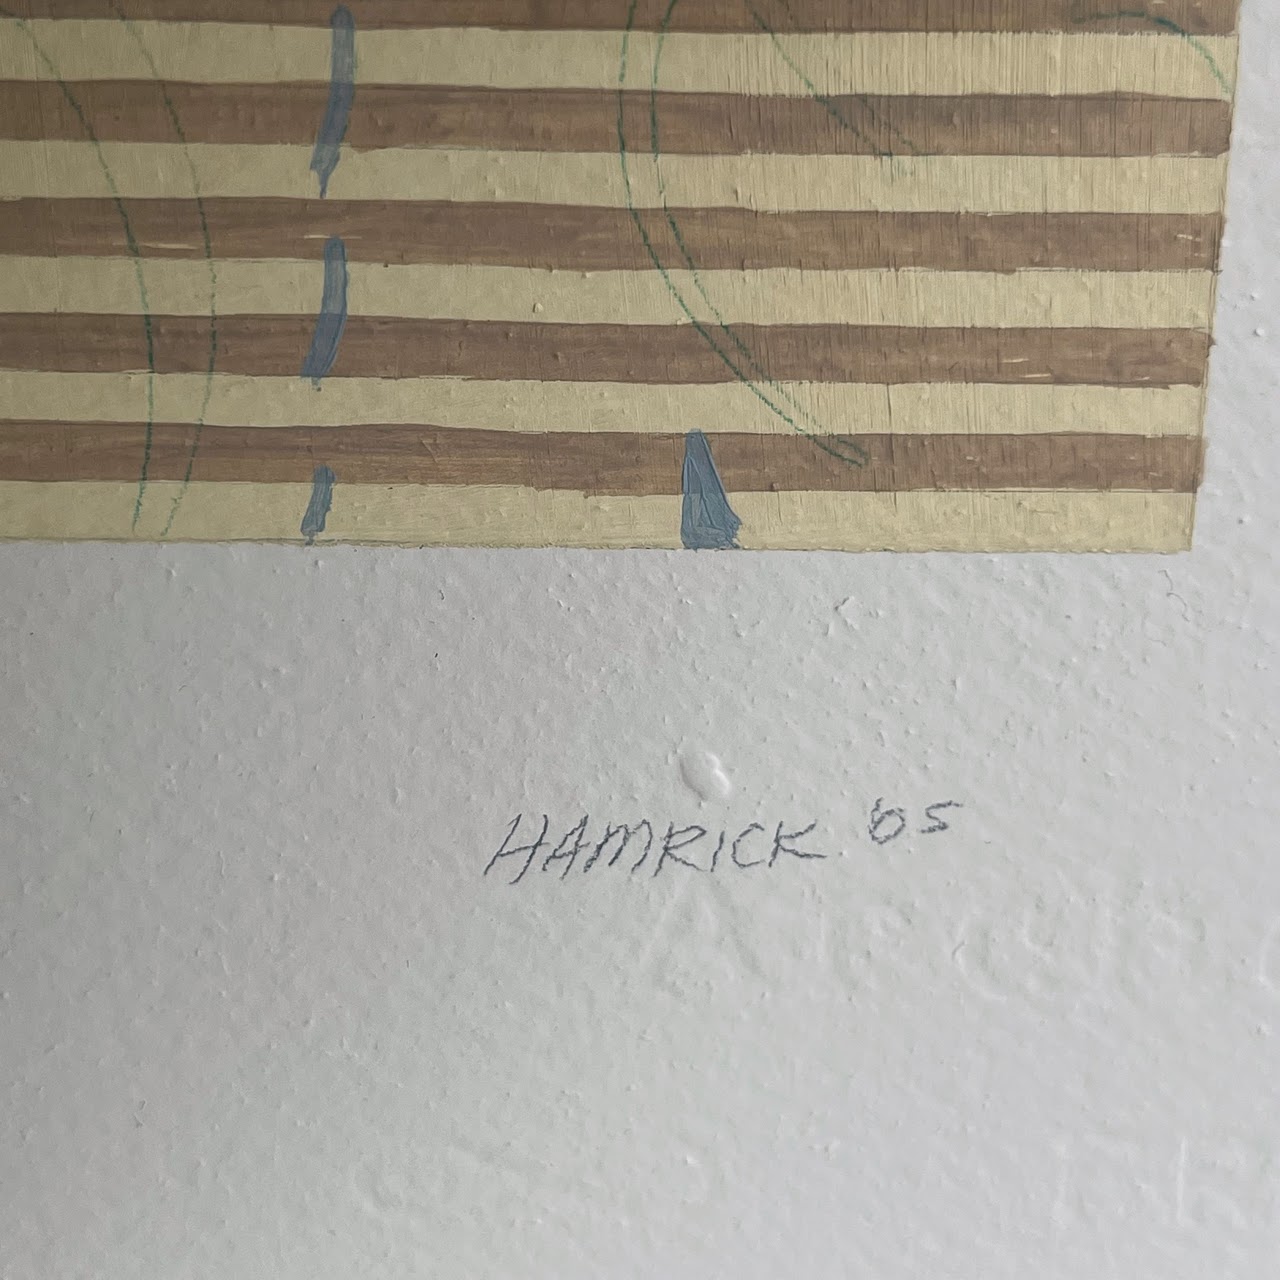 Hamrick 'Sarlat Mist' Signed Gouache and Pencil Abstract Painting